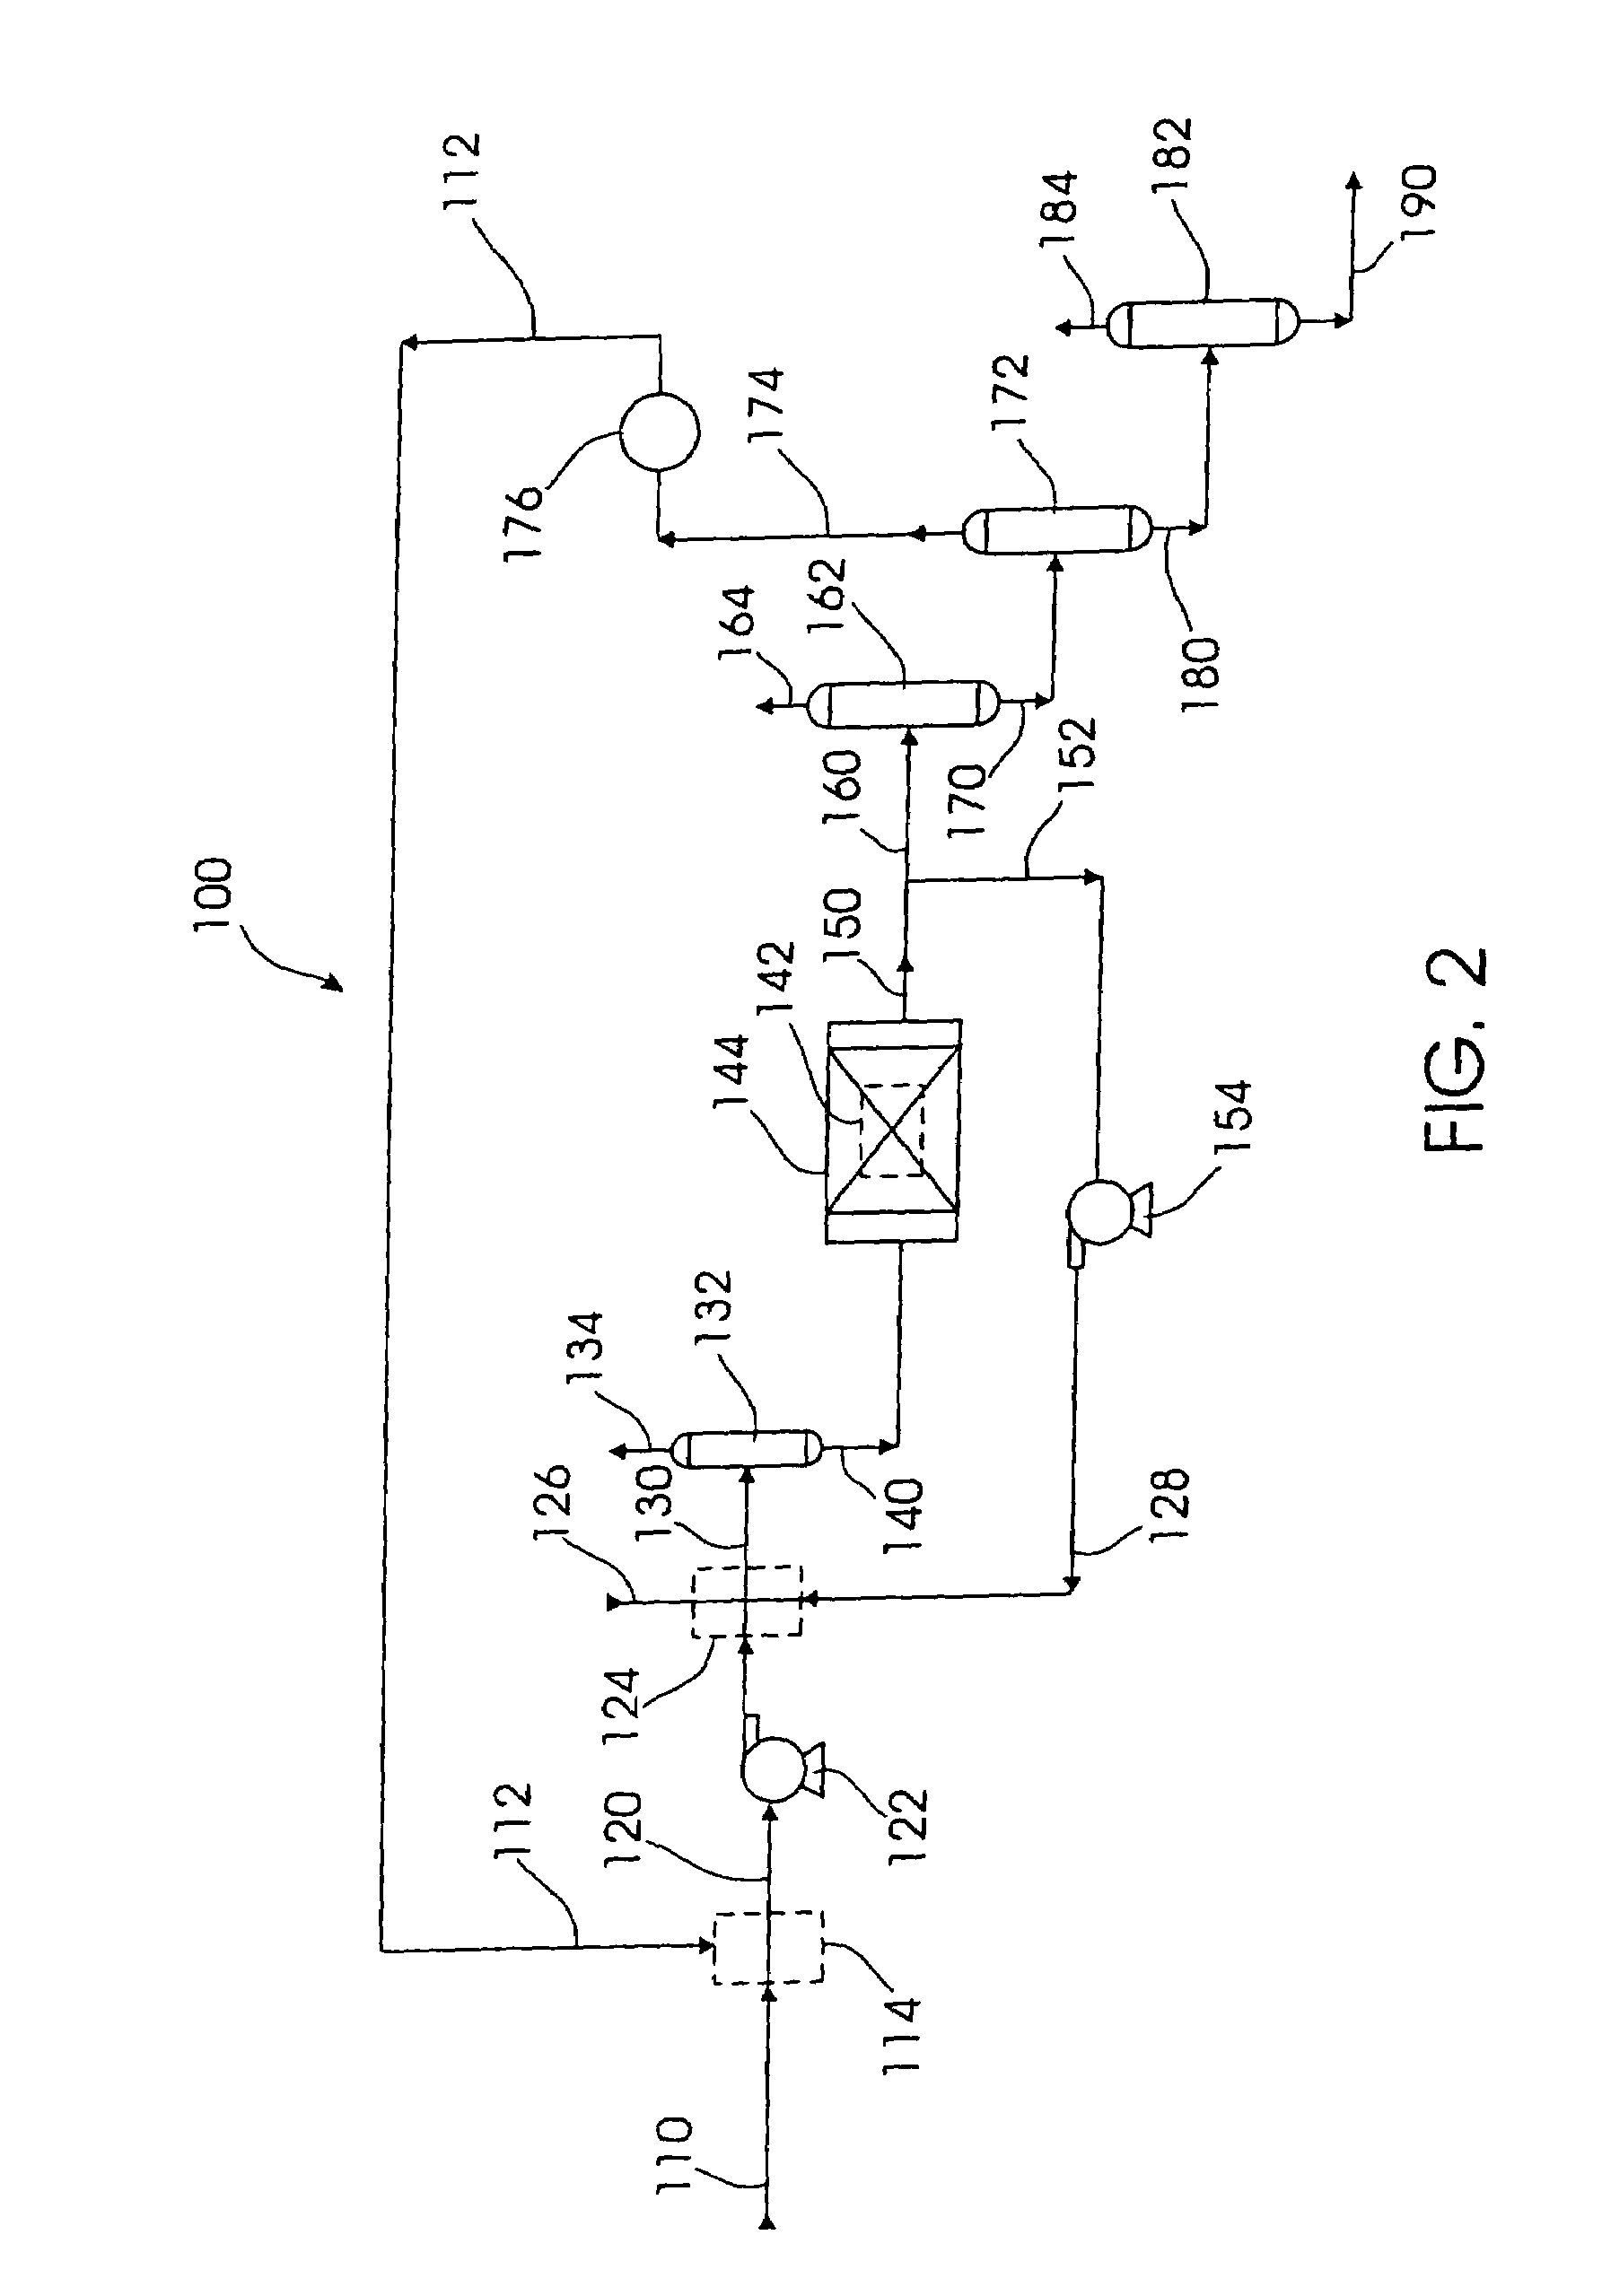 Control system method and apparatus for two phase hydroprocessing